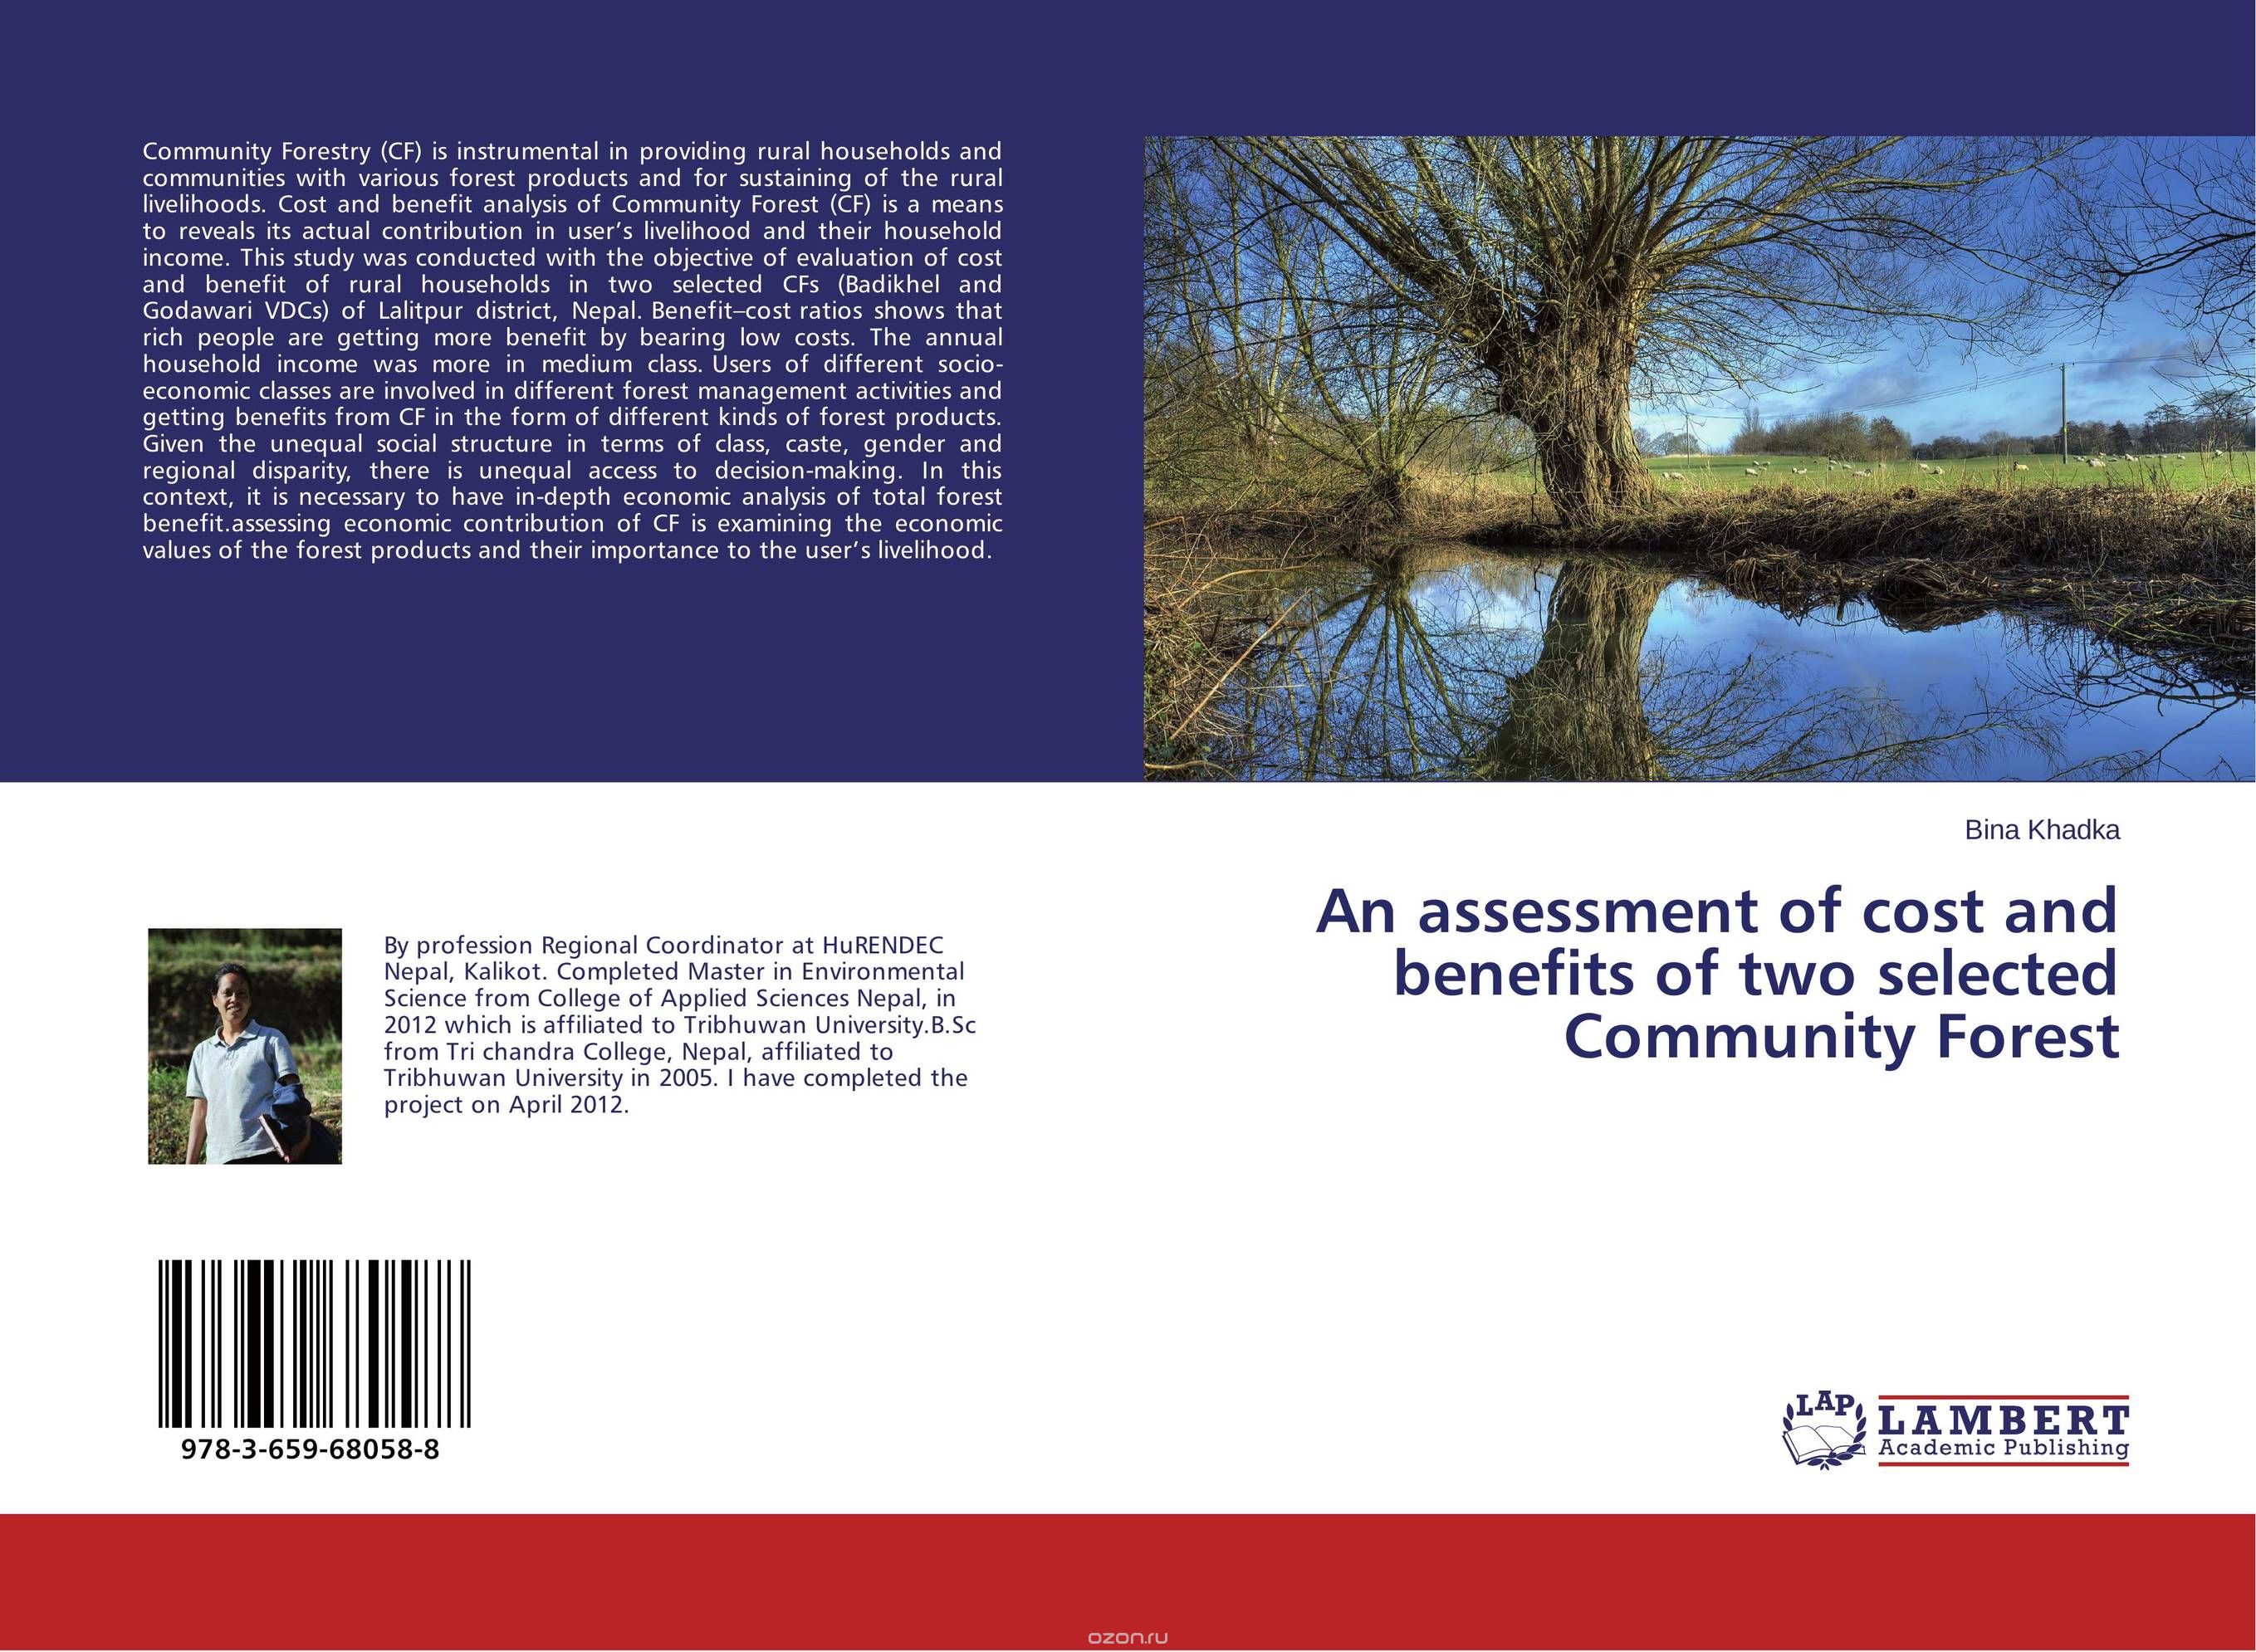 Скачать книгу "An assessment of cost and benefits of two selected Community Forest"